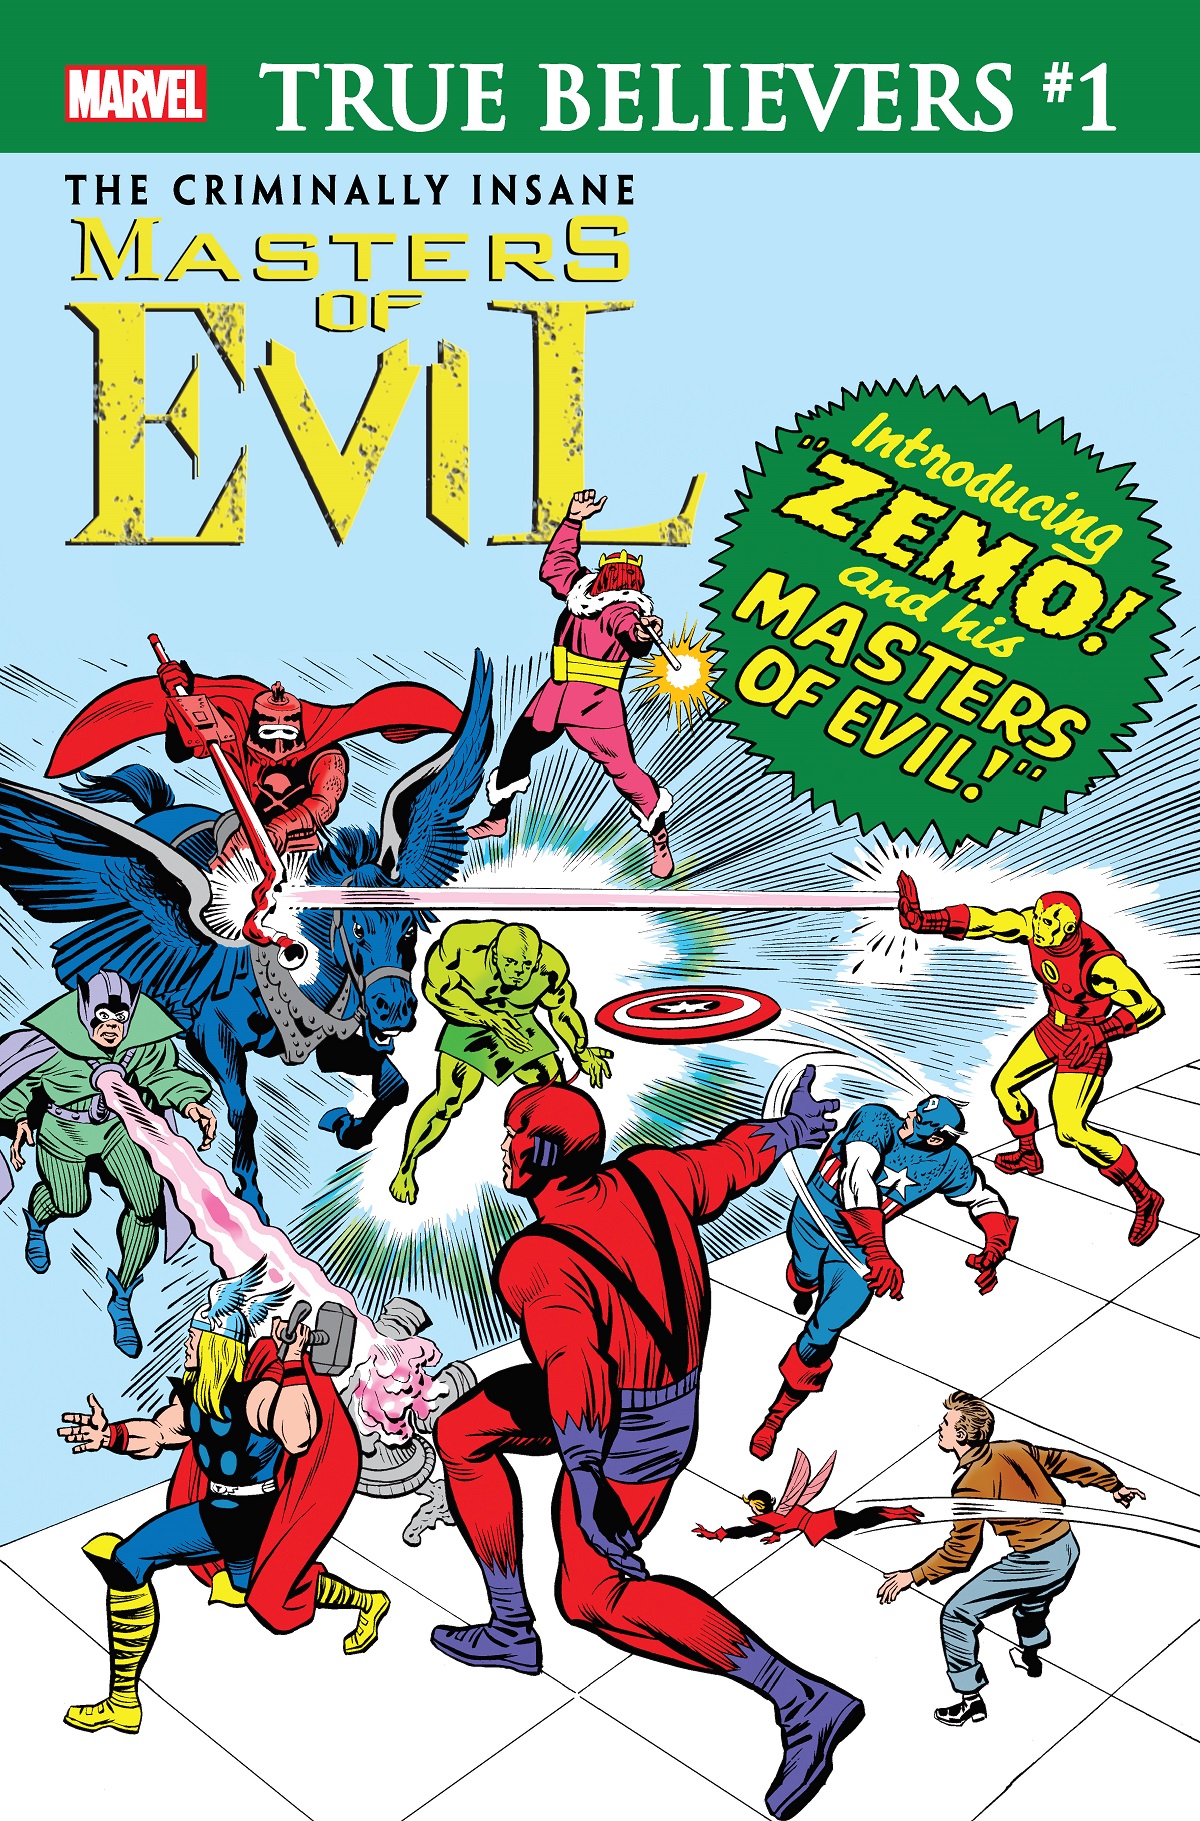 True Believers: The Criminally Insane - Masters Of Evil (2020) #1